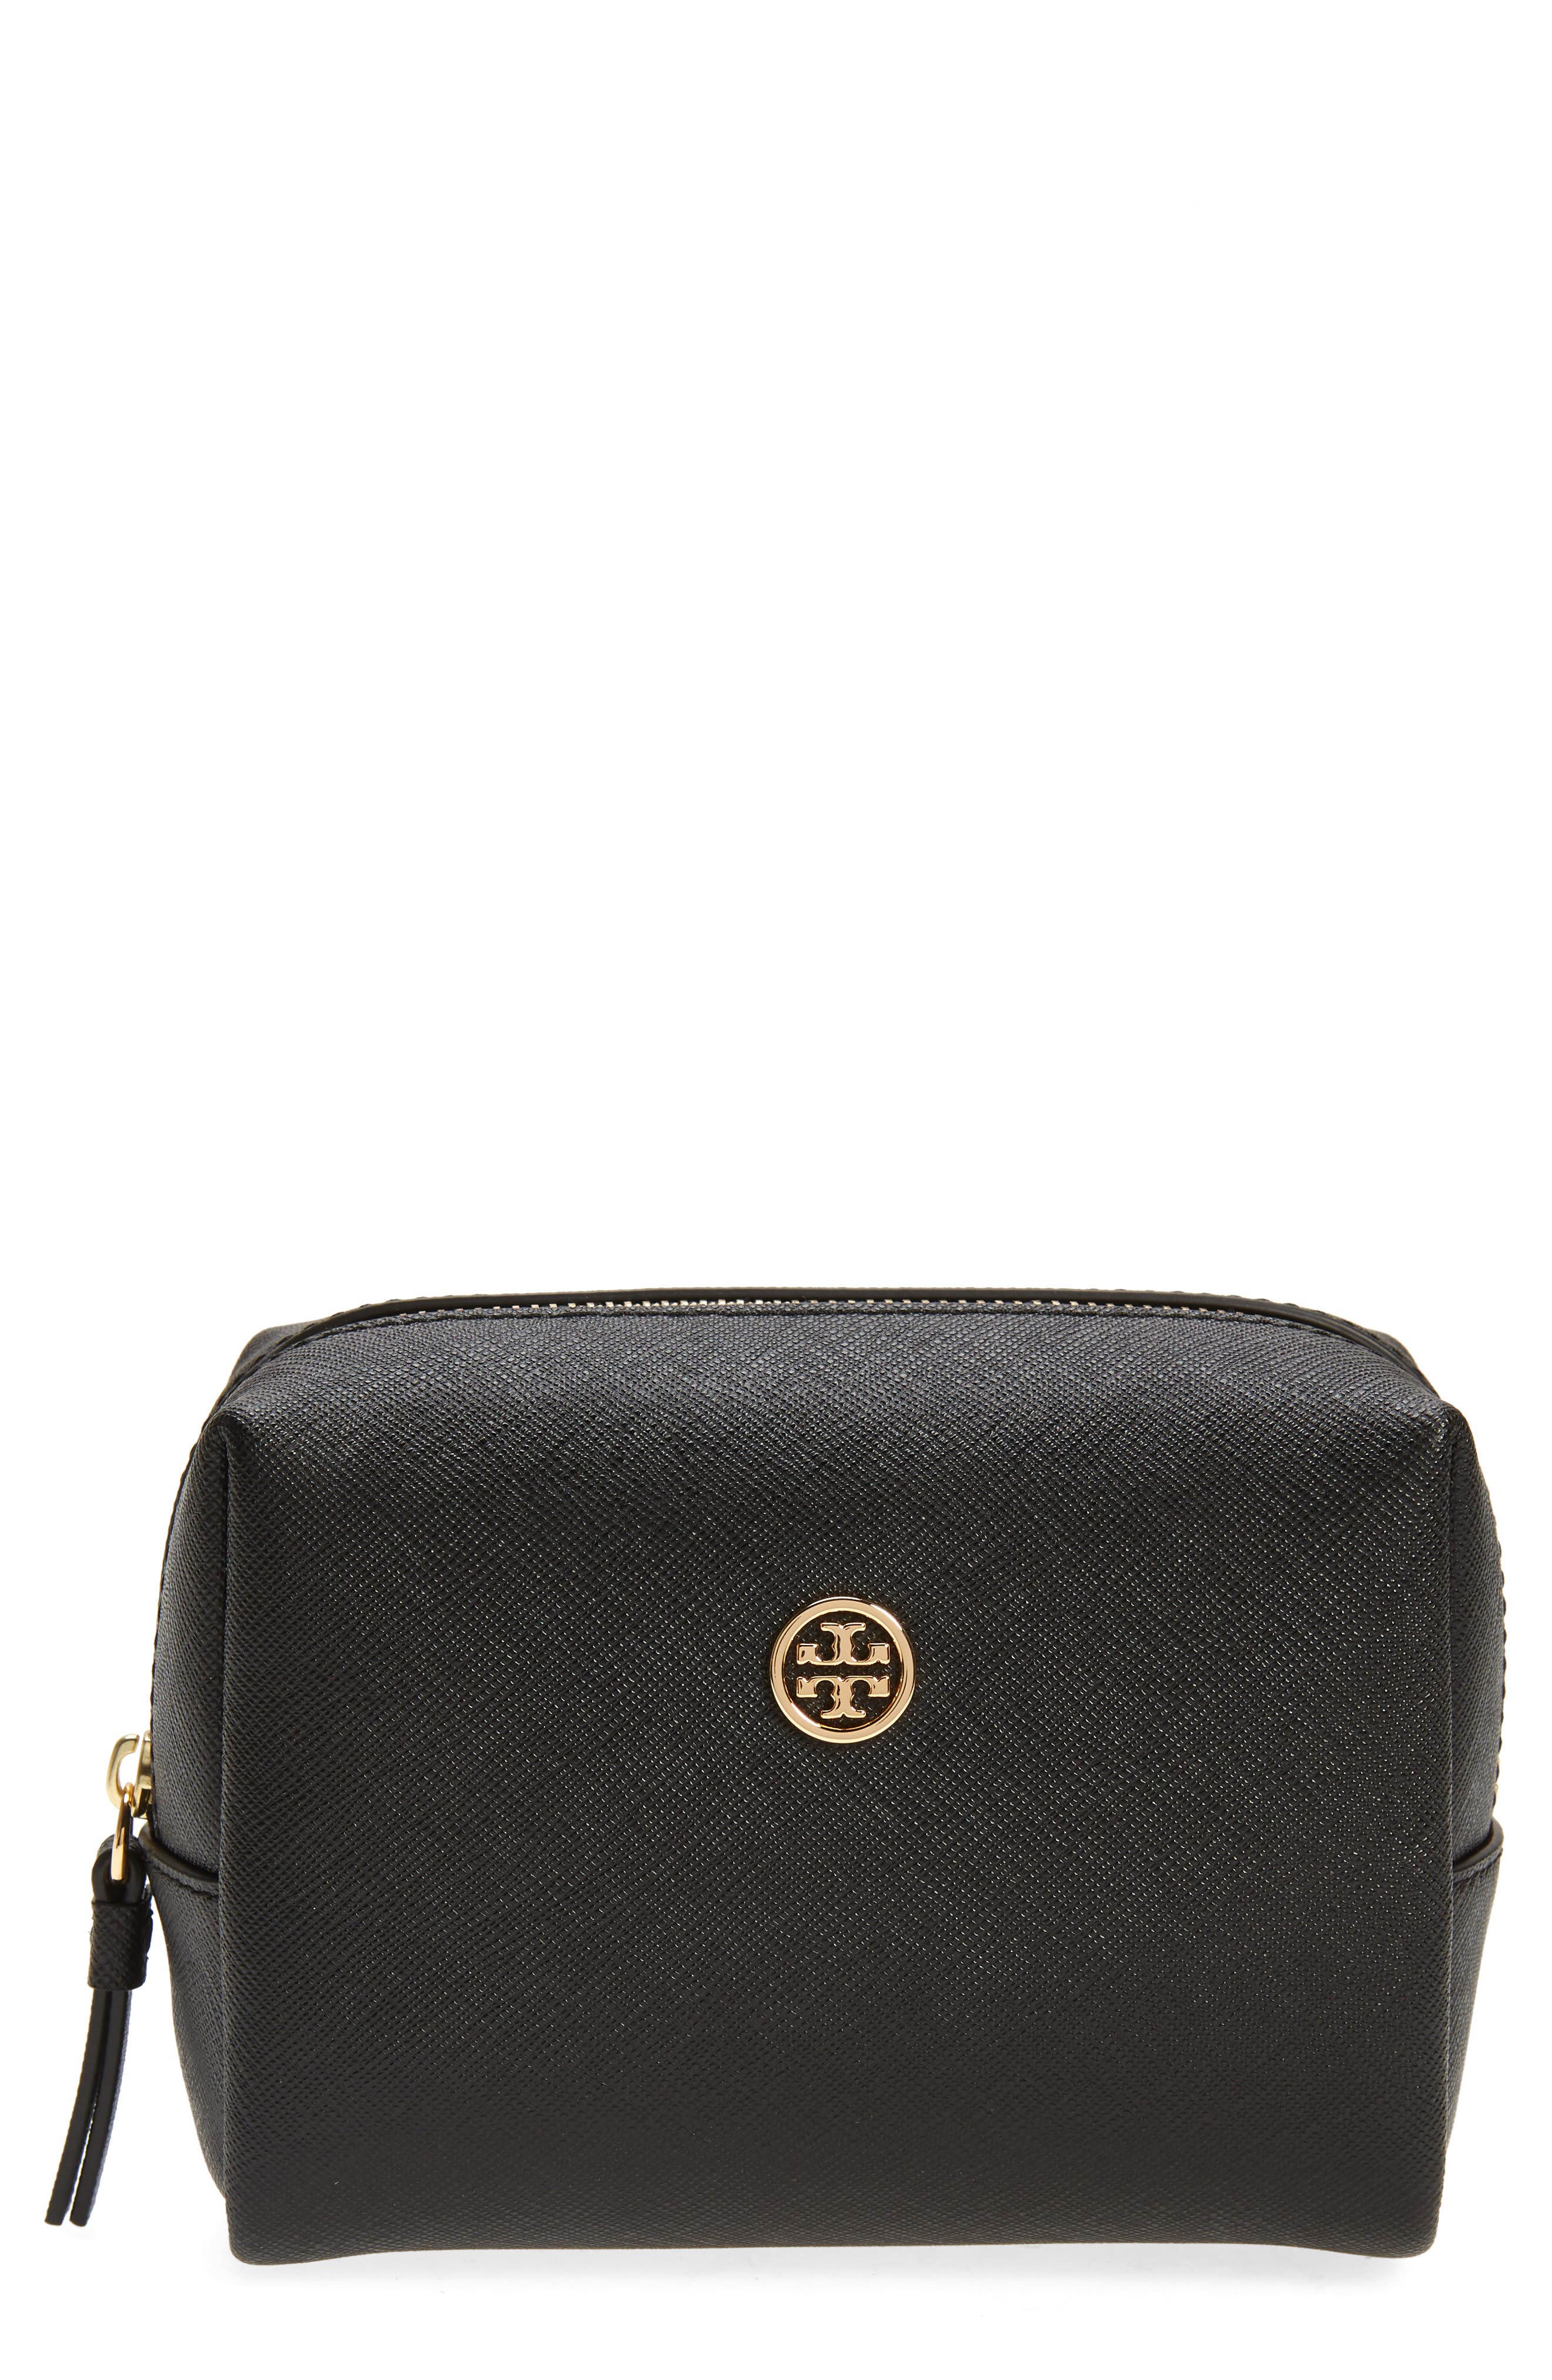 Tory Burch Toiletry Bag Clearance, 58% OFF 